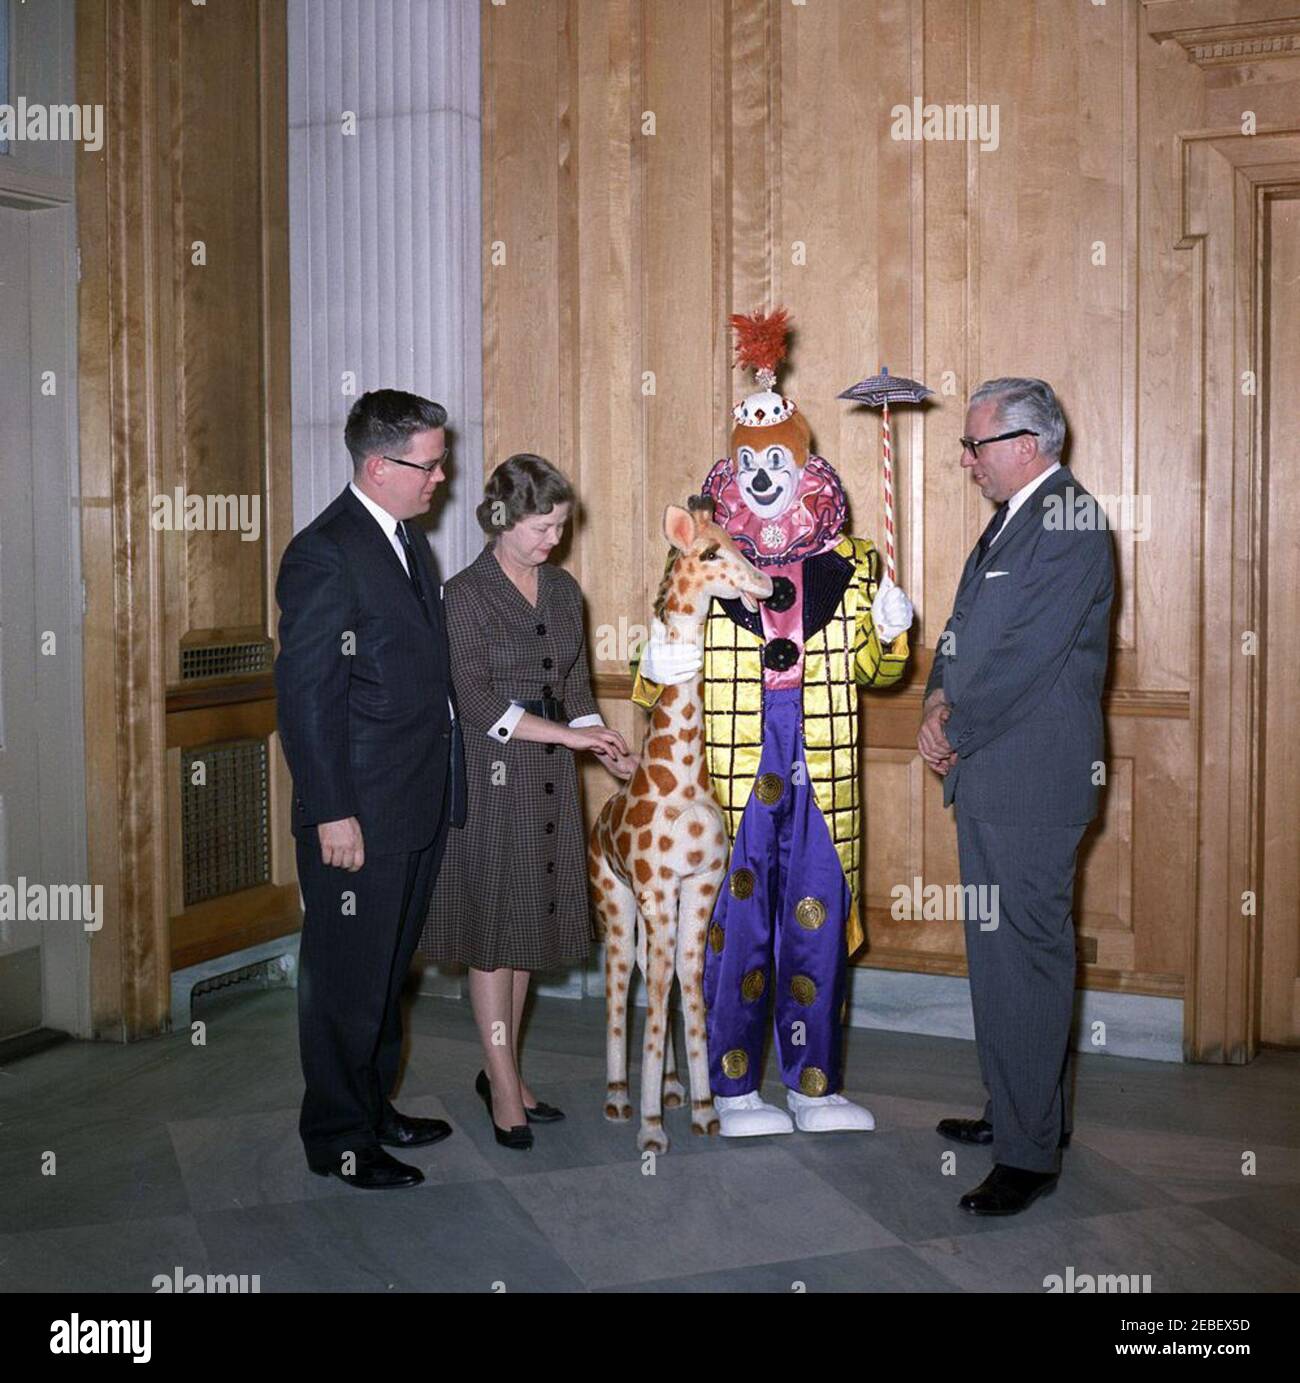 Ringling Bros. and Barnum u0026 Bailey Circus clown Jackie Le Claire presents a gift for Caroline Kennedy (CBK), with David Polland and Hortense Burton (John J. McNally). Ringling Bros. and Barnum u0026 Bailey Circus clown, Jackie LeClaire, presents a toy stuffed giraffe as a gift for Caroline Kennedy. L-R: Presidential Assistant, John J. McNally; Chief of the Correspondence Pool in the Social Entertainments Office, Hortense Burton; Mr. LeClaire; David Polland. East Wing Lobby, White House, Washington, D.C. Stock Photo